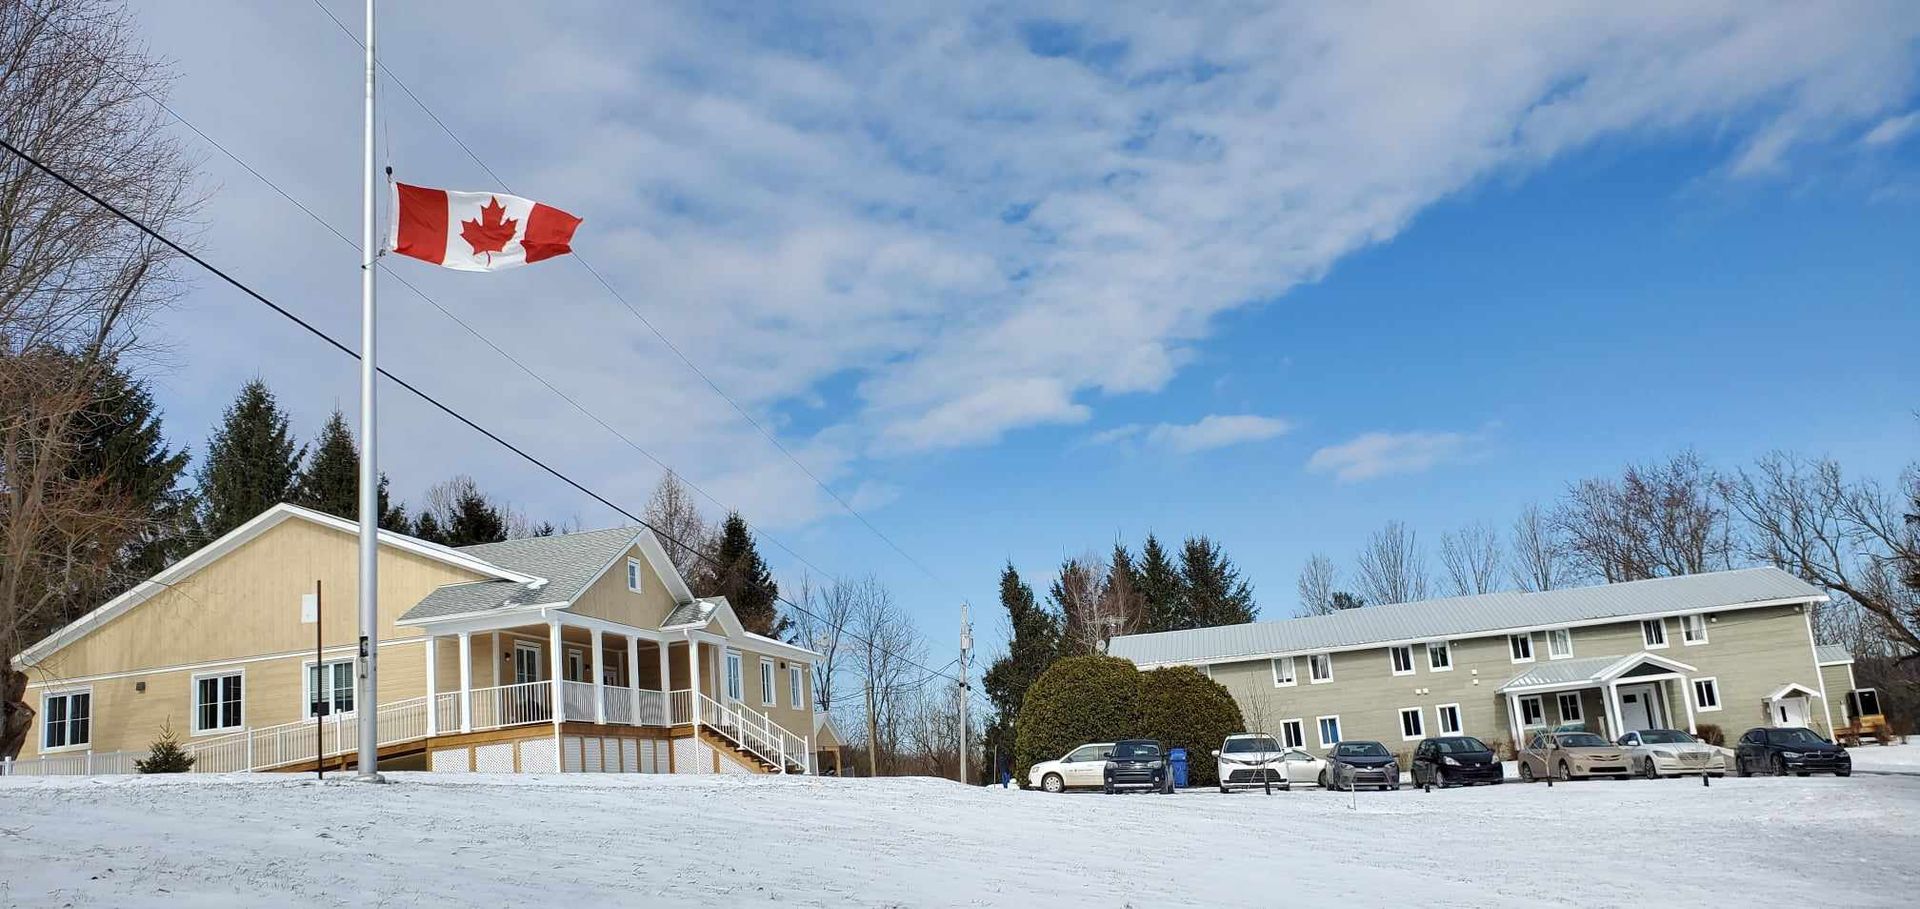 a canadian flag is flying in front of a house in the snow